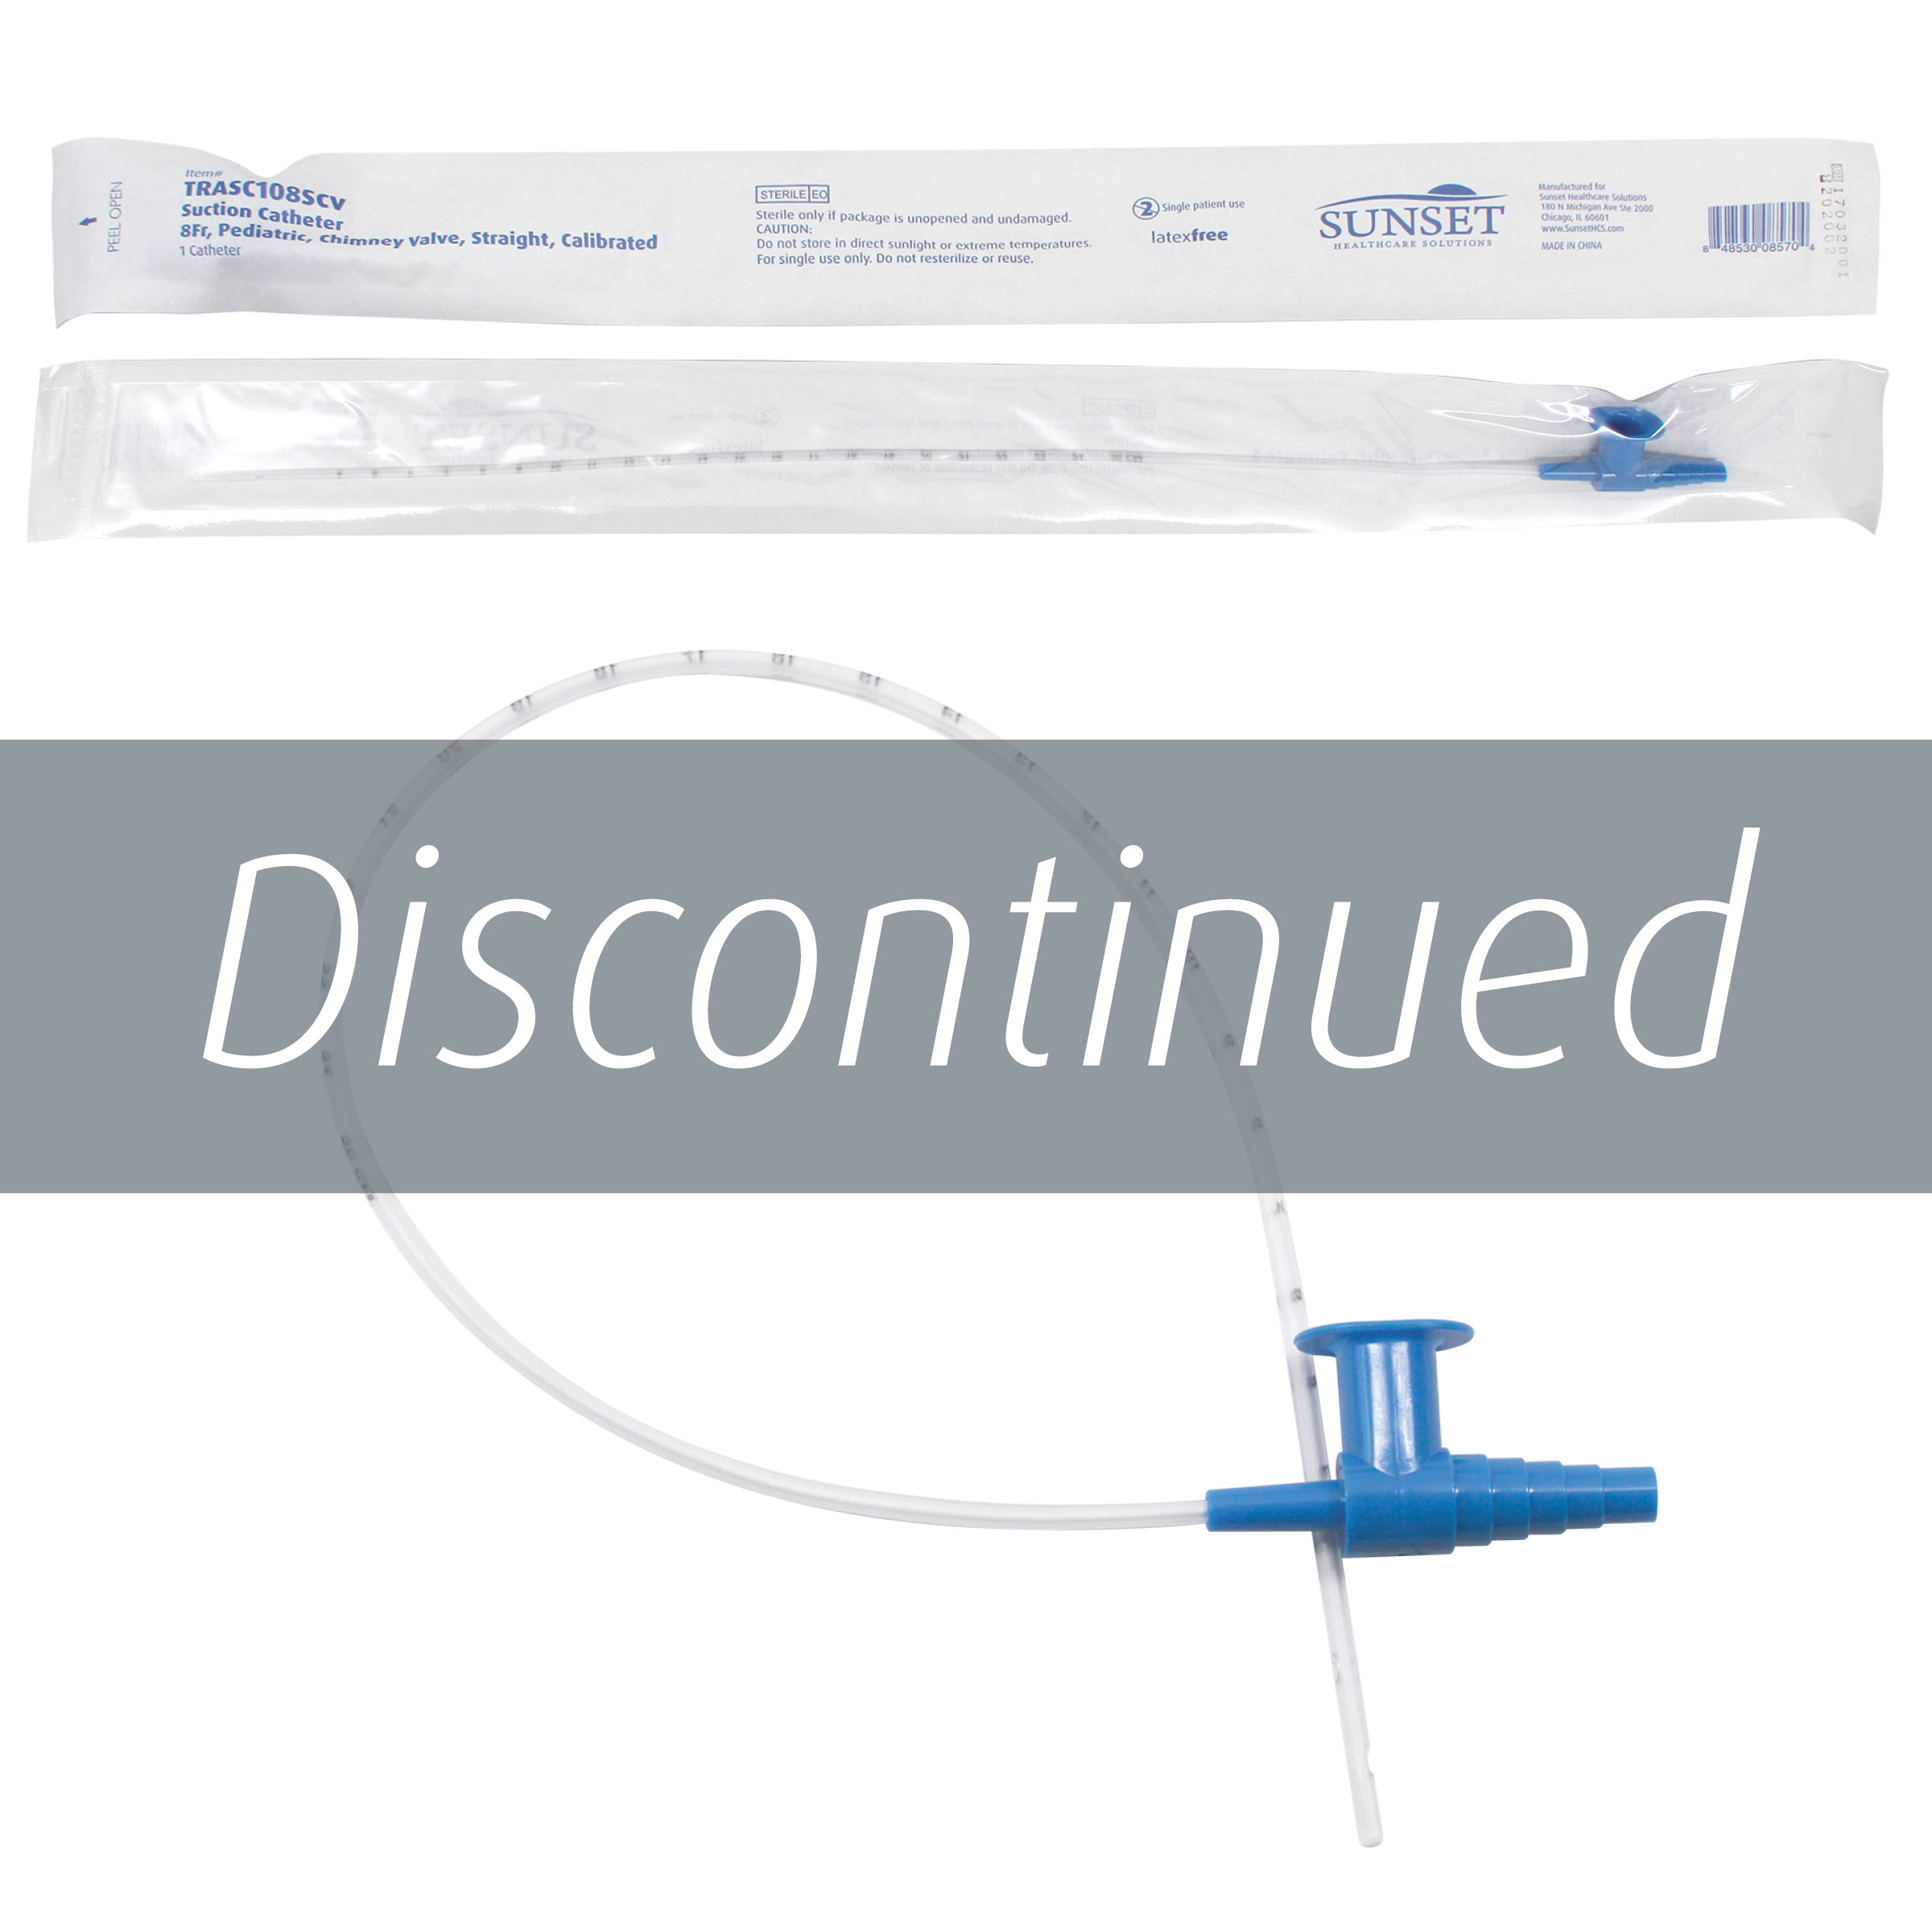 Catheters – Straight, Calibrated, Chimney Valve photo with "Discontinued" overlay